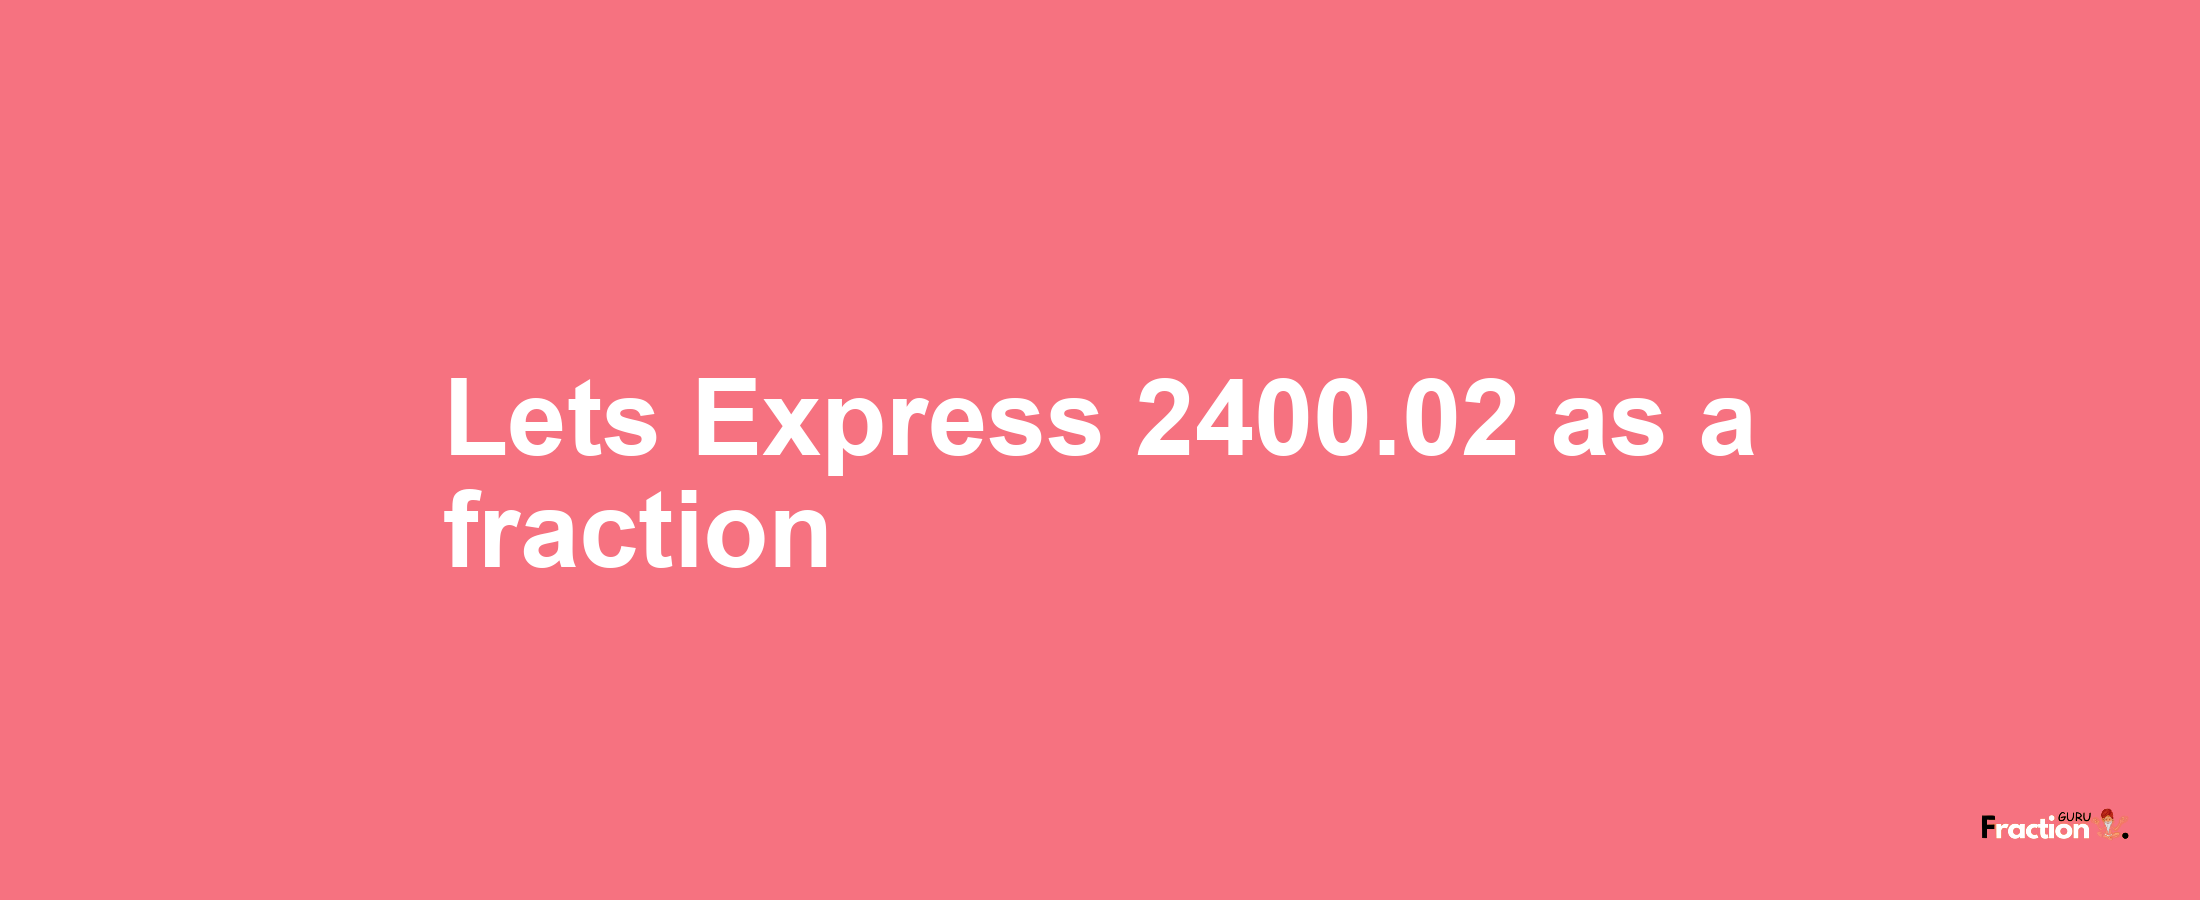 Lets Express 2400.02 as afraction